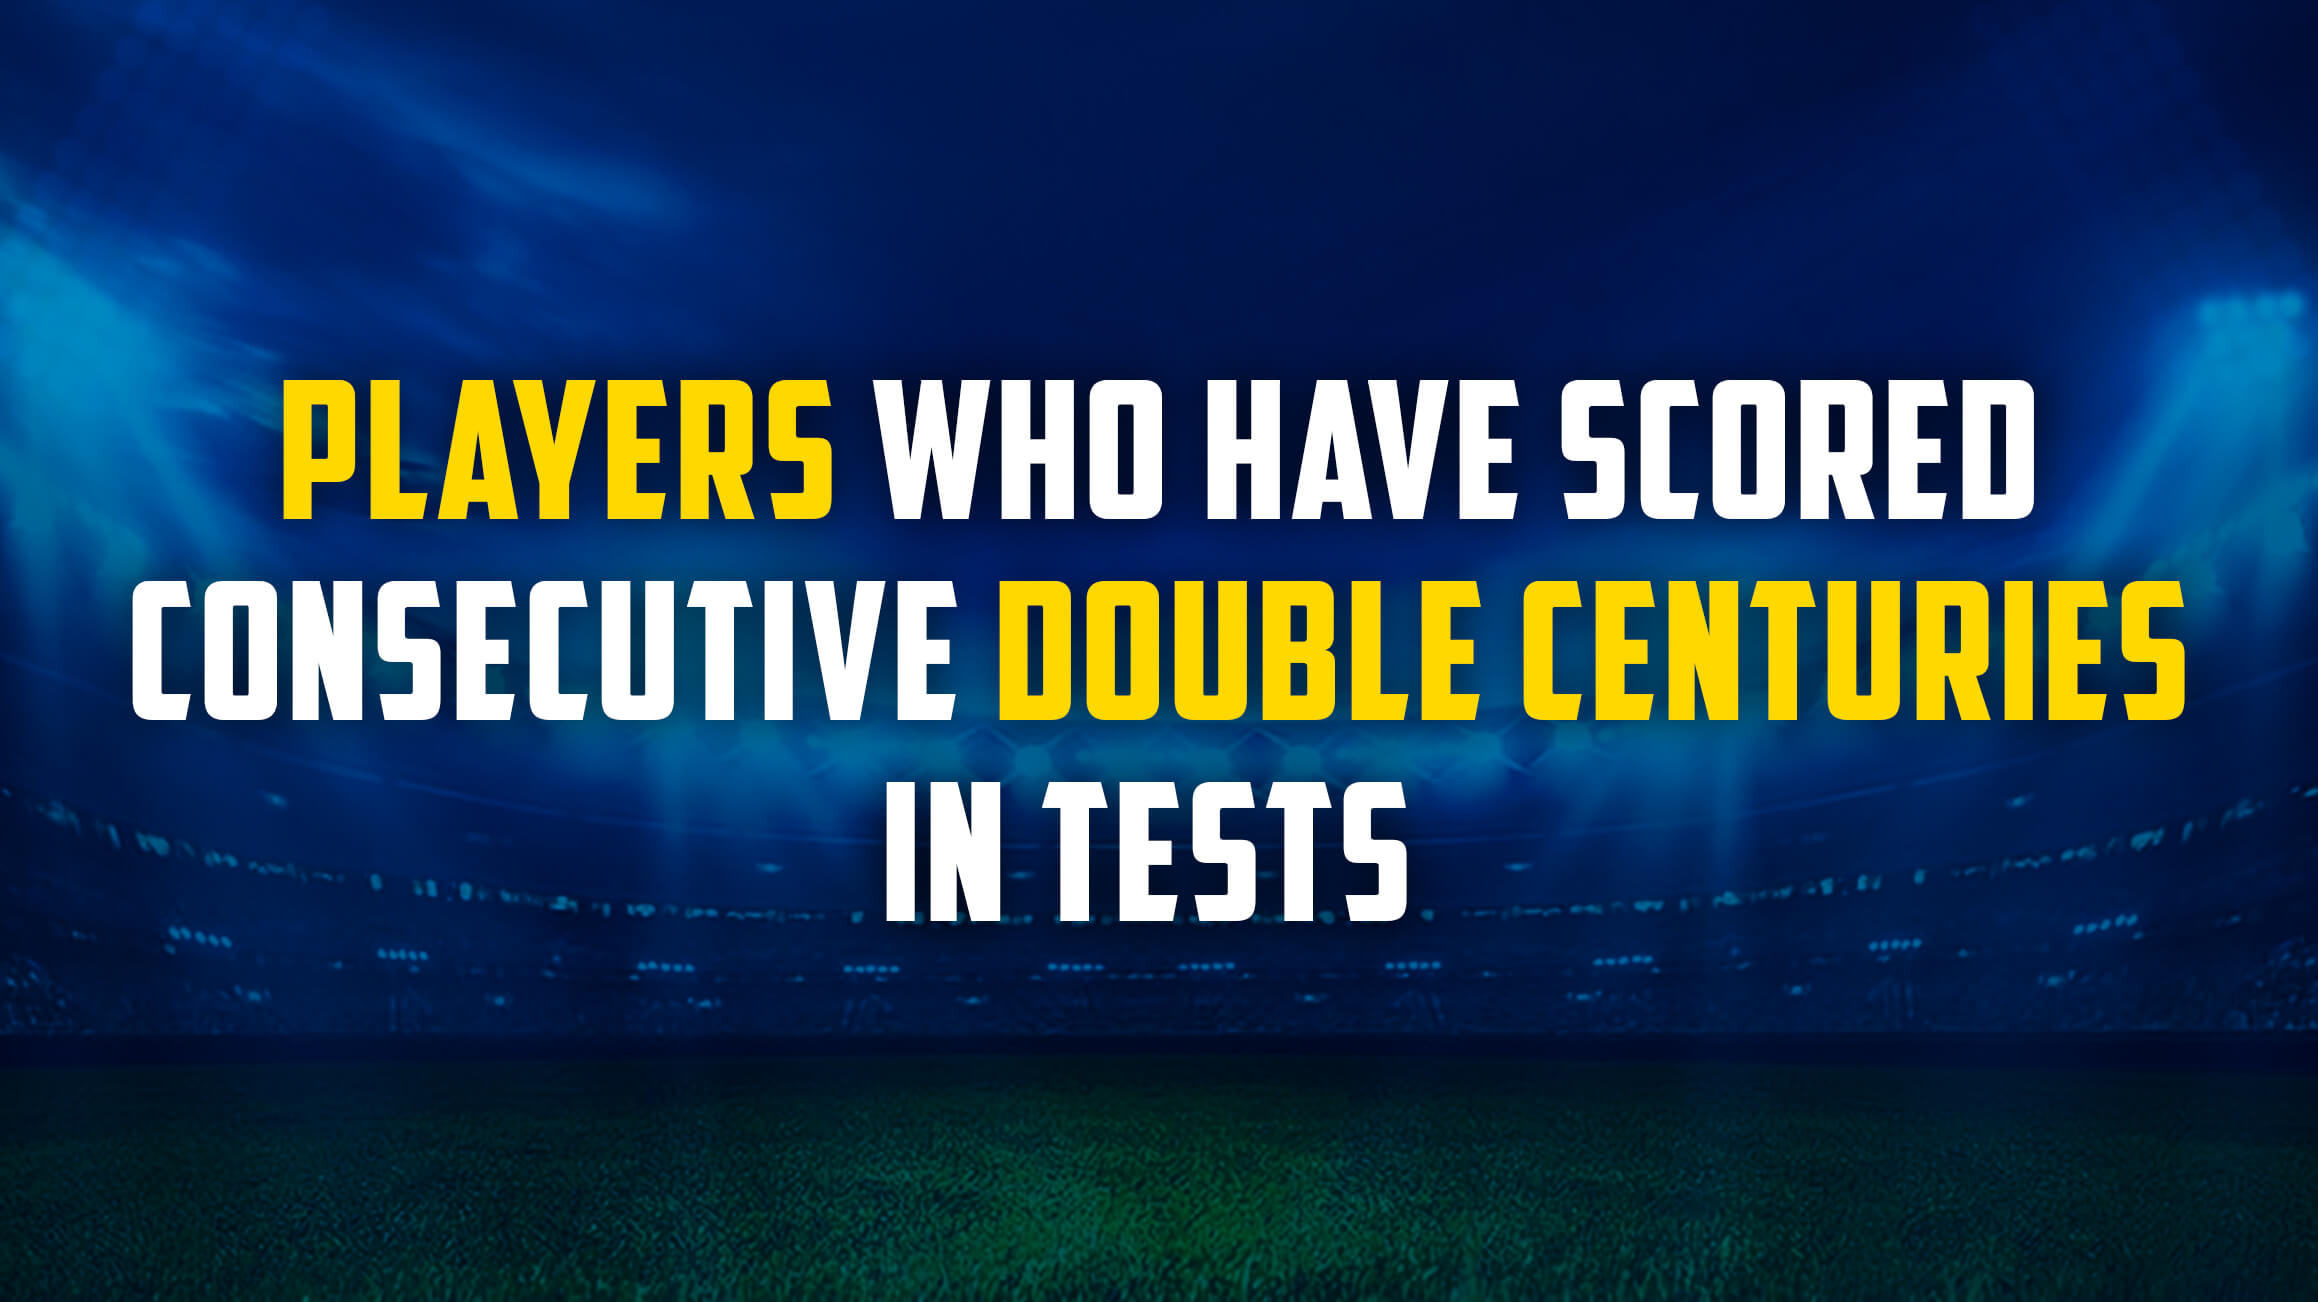 Players who have scored consecutive double centuries in Tests